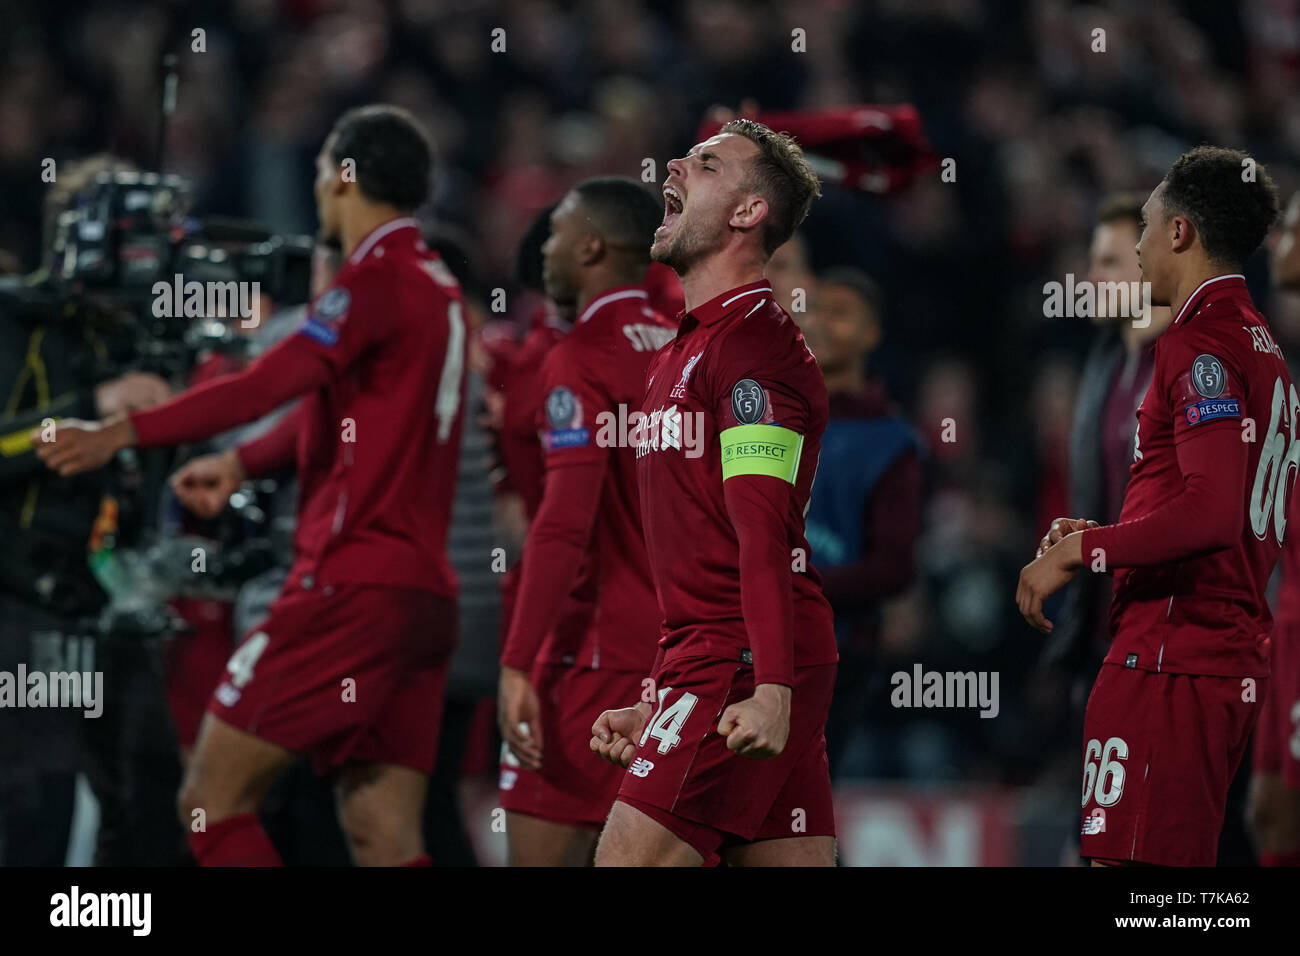 Anfield Stadium, Liverpool, England; UEFA Champions League Semi Final, Second Leg, Liverpool FC vs FC Barcelona ;, Jordan. 7th May, 2019. Henderson (14) of Liverpool celebrate their 4-0 win over Barcelona to go through to the final Credit: Terry Donnelly/News Images Credit: News Images /Alamy Live News Stock Photo